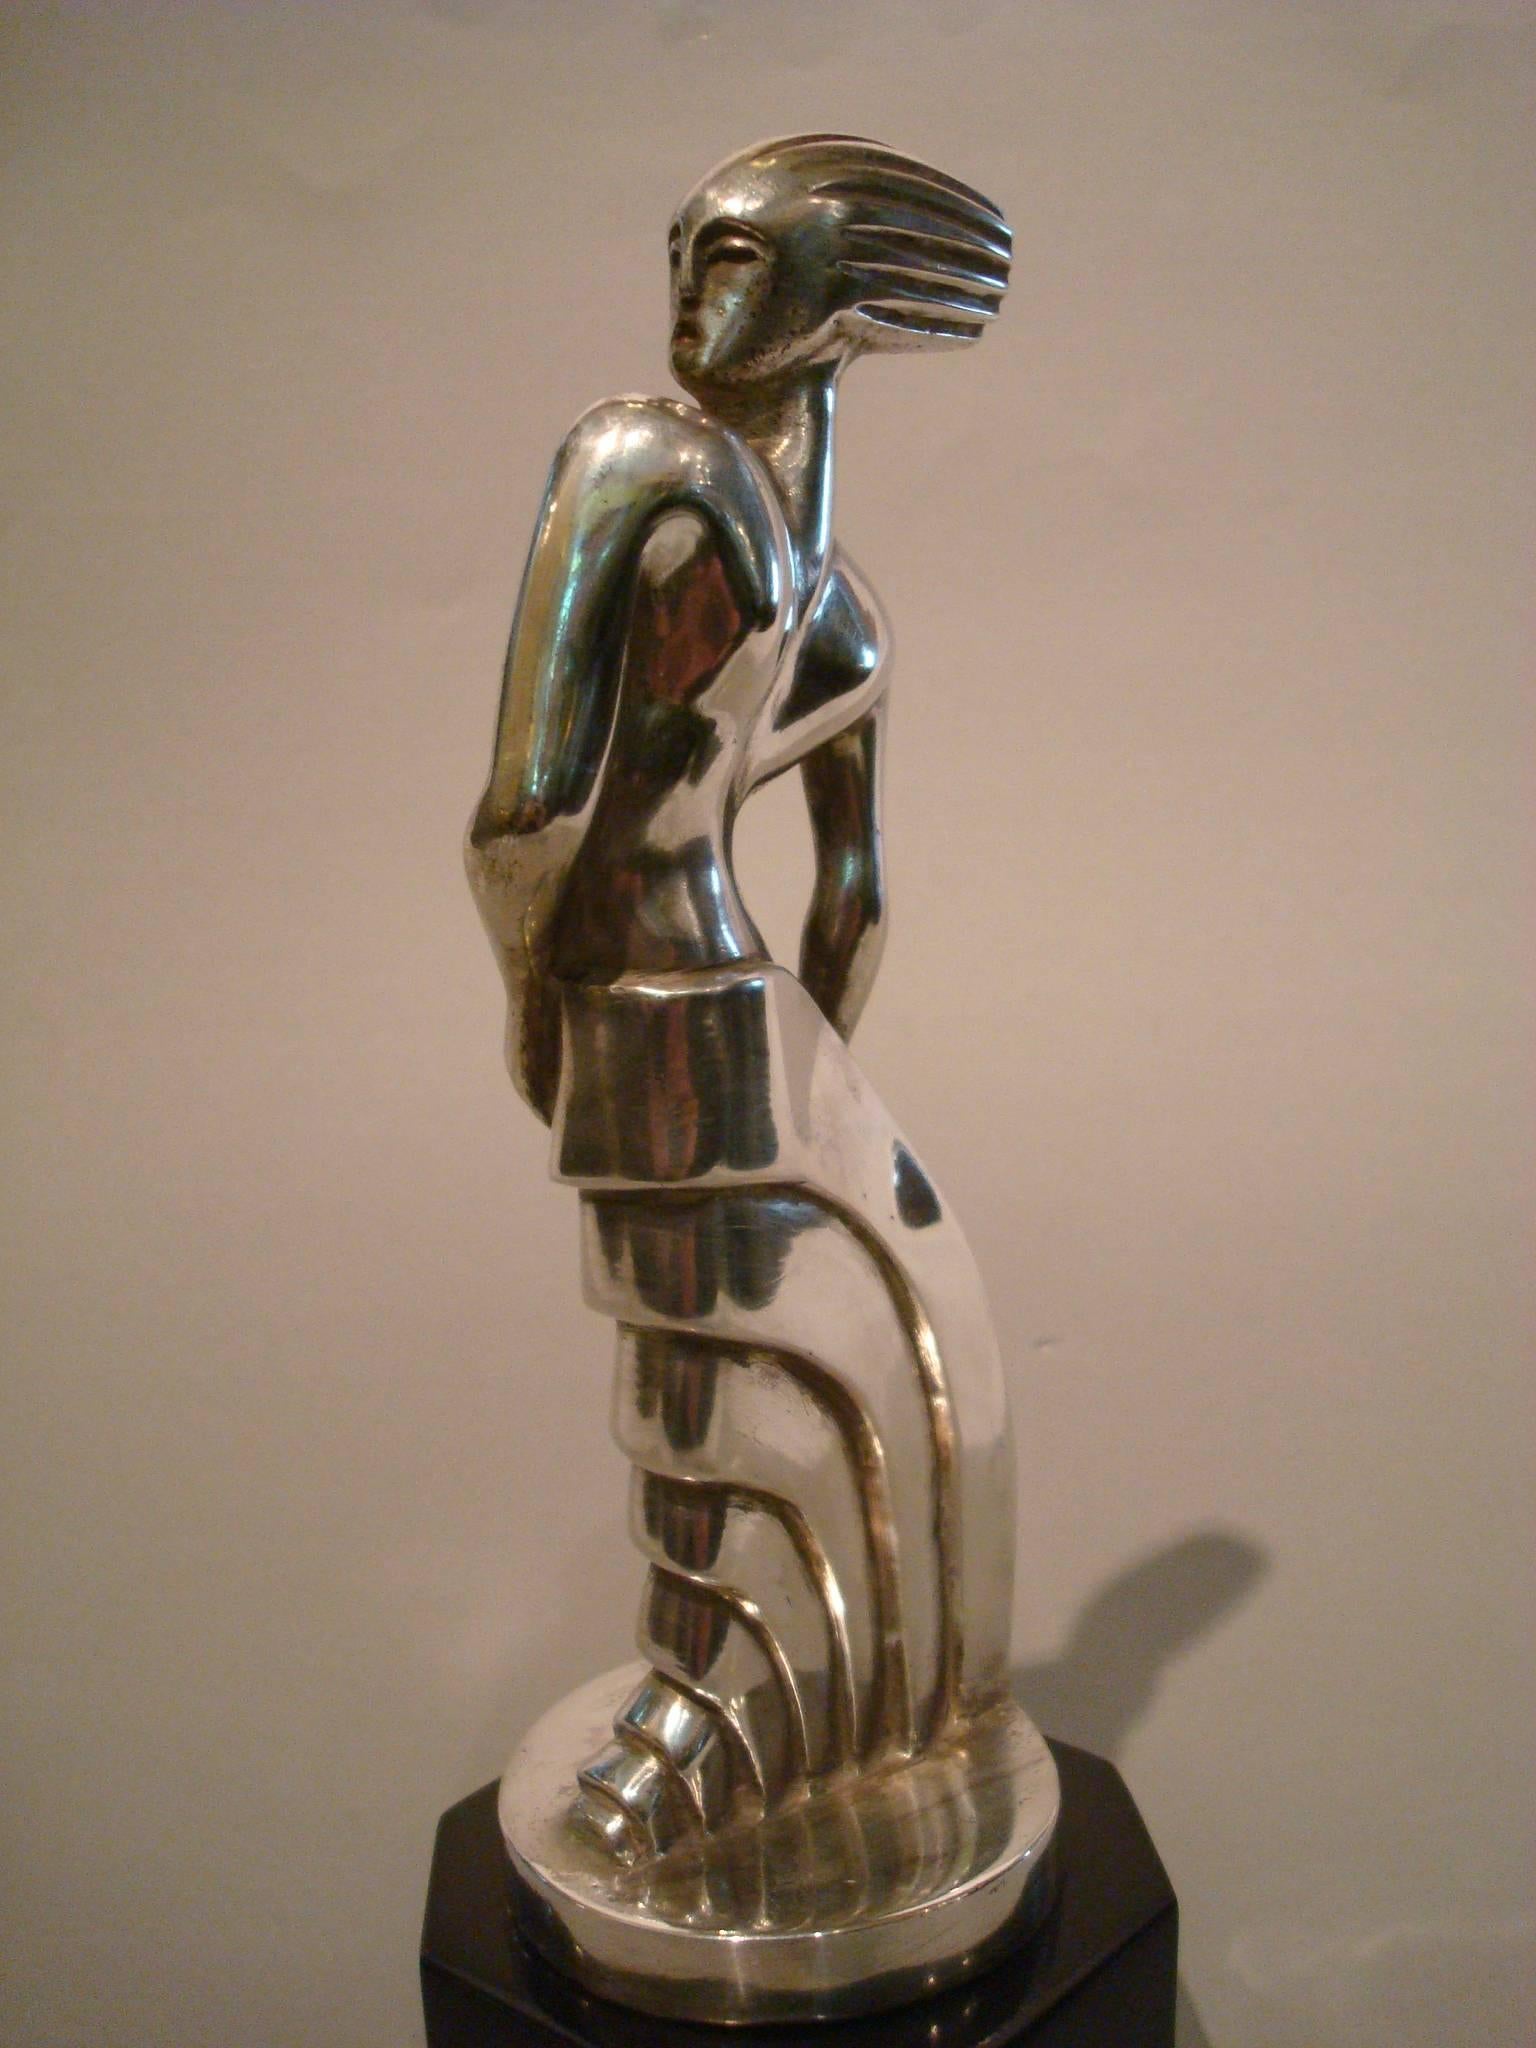 Art Deco silvered bronze sculpture standing woman by S. Rueff, France, 1925.
Stylized Art Deco woman. Rare car mascot hood ornament. Can be also be used as paperweight. Stylized Art Deco woman, silver-plated bronze, black polished wooden base.